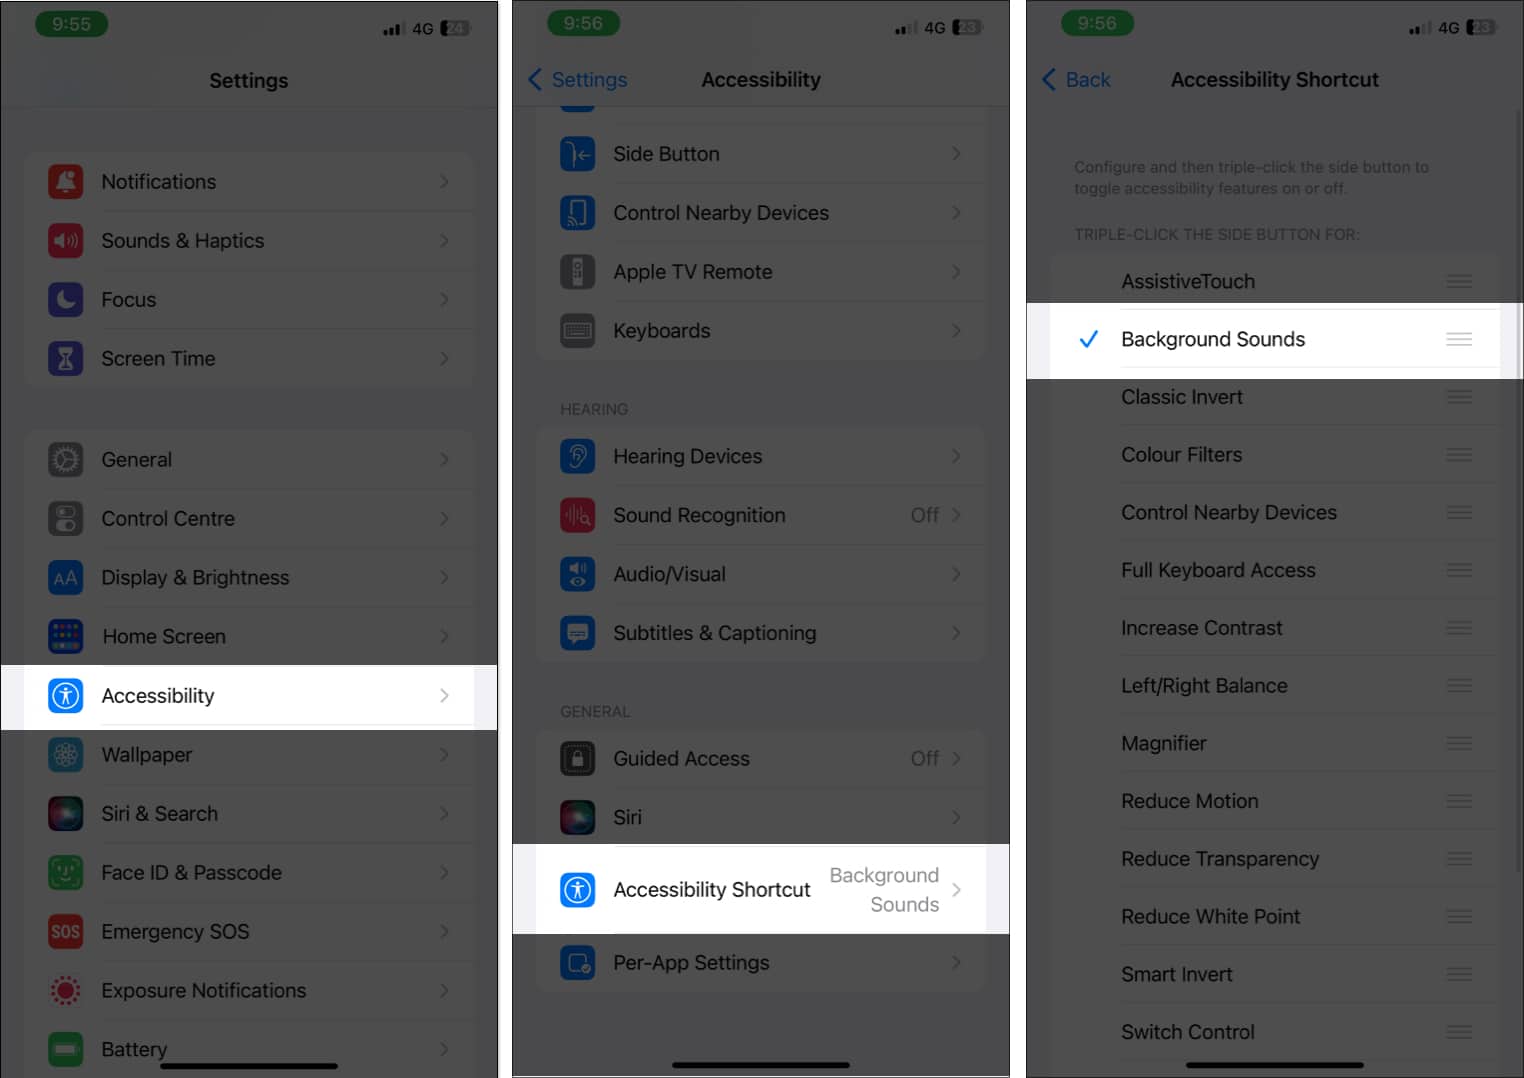 Tap on Accessiblity and Accessiblity Shortcut and Select Background Sound on iPhone